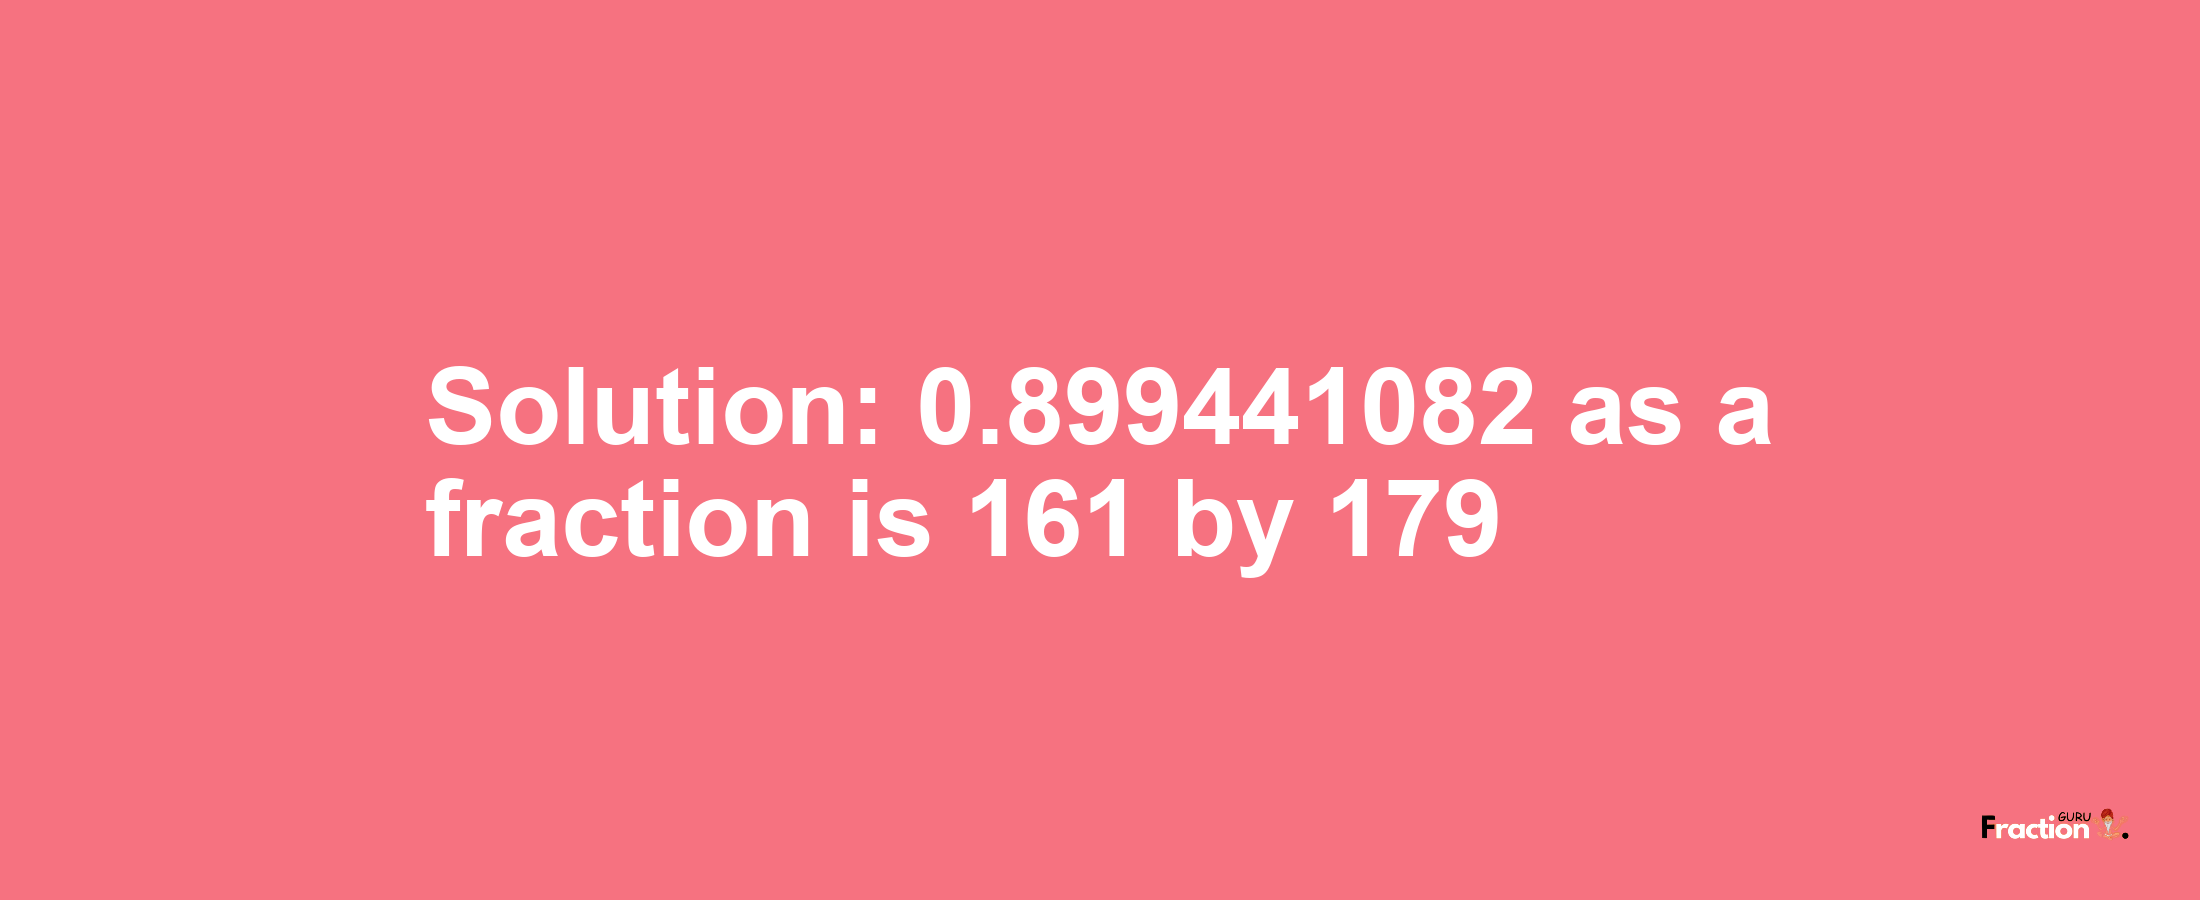 Solution:0.899441082 as a fraction is 161/179